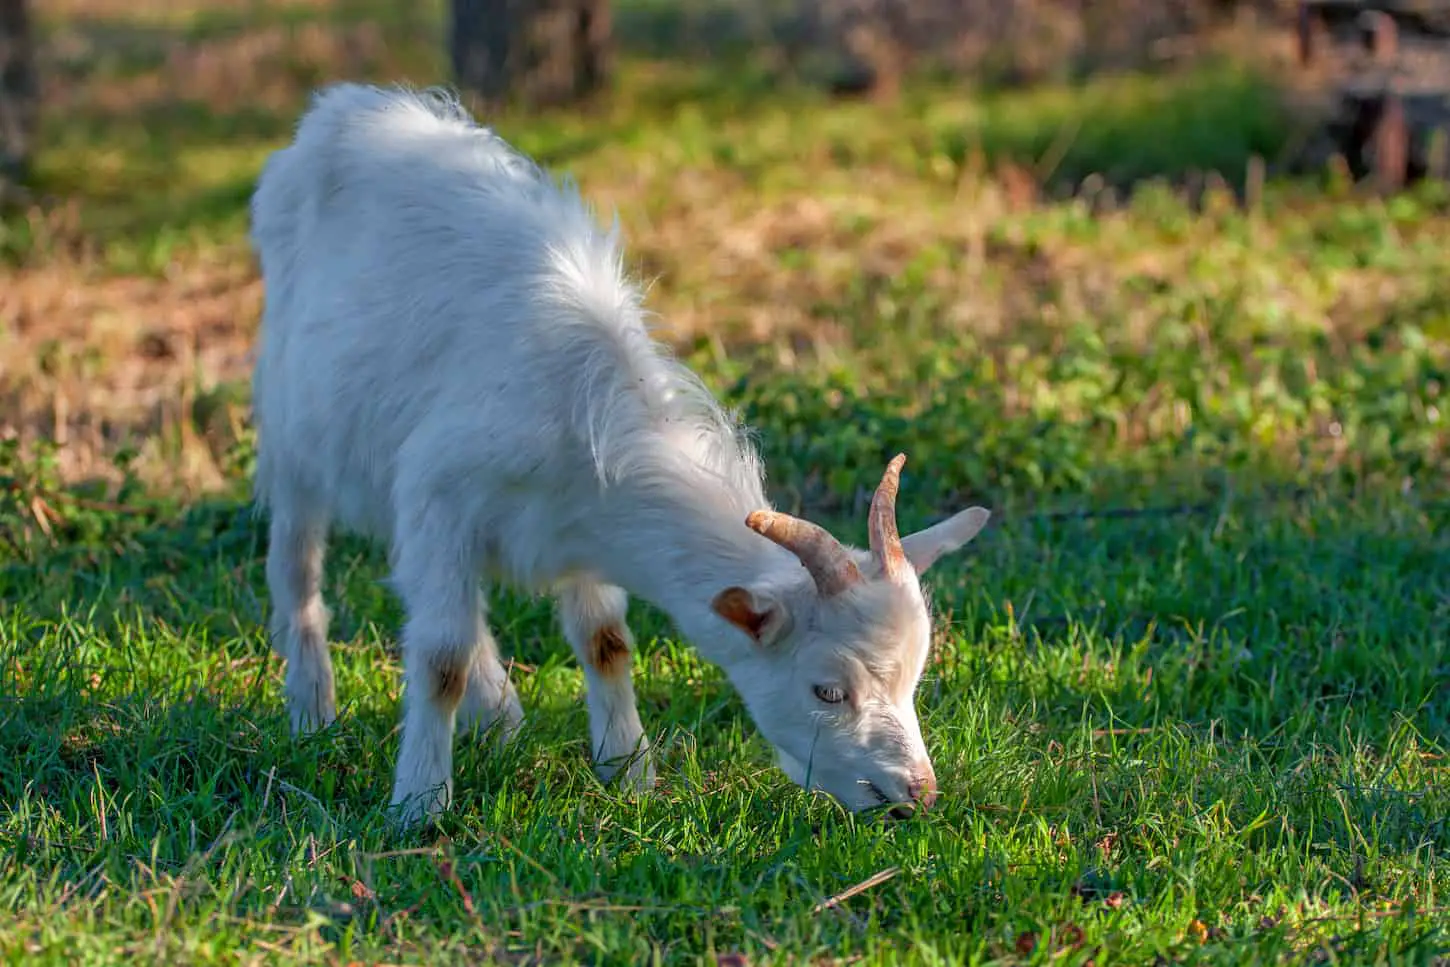 Can Goats Eat Sunflower Plants and Seeds? Here’s the Thing